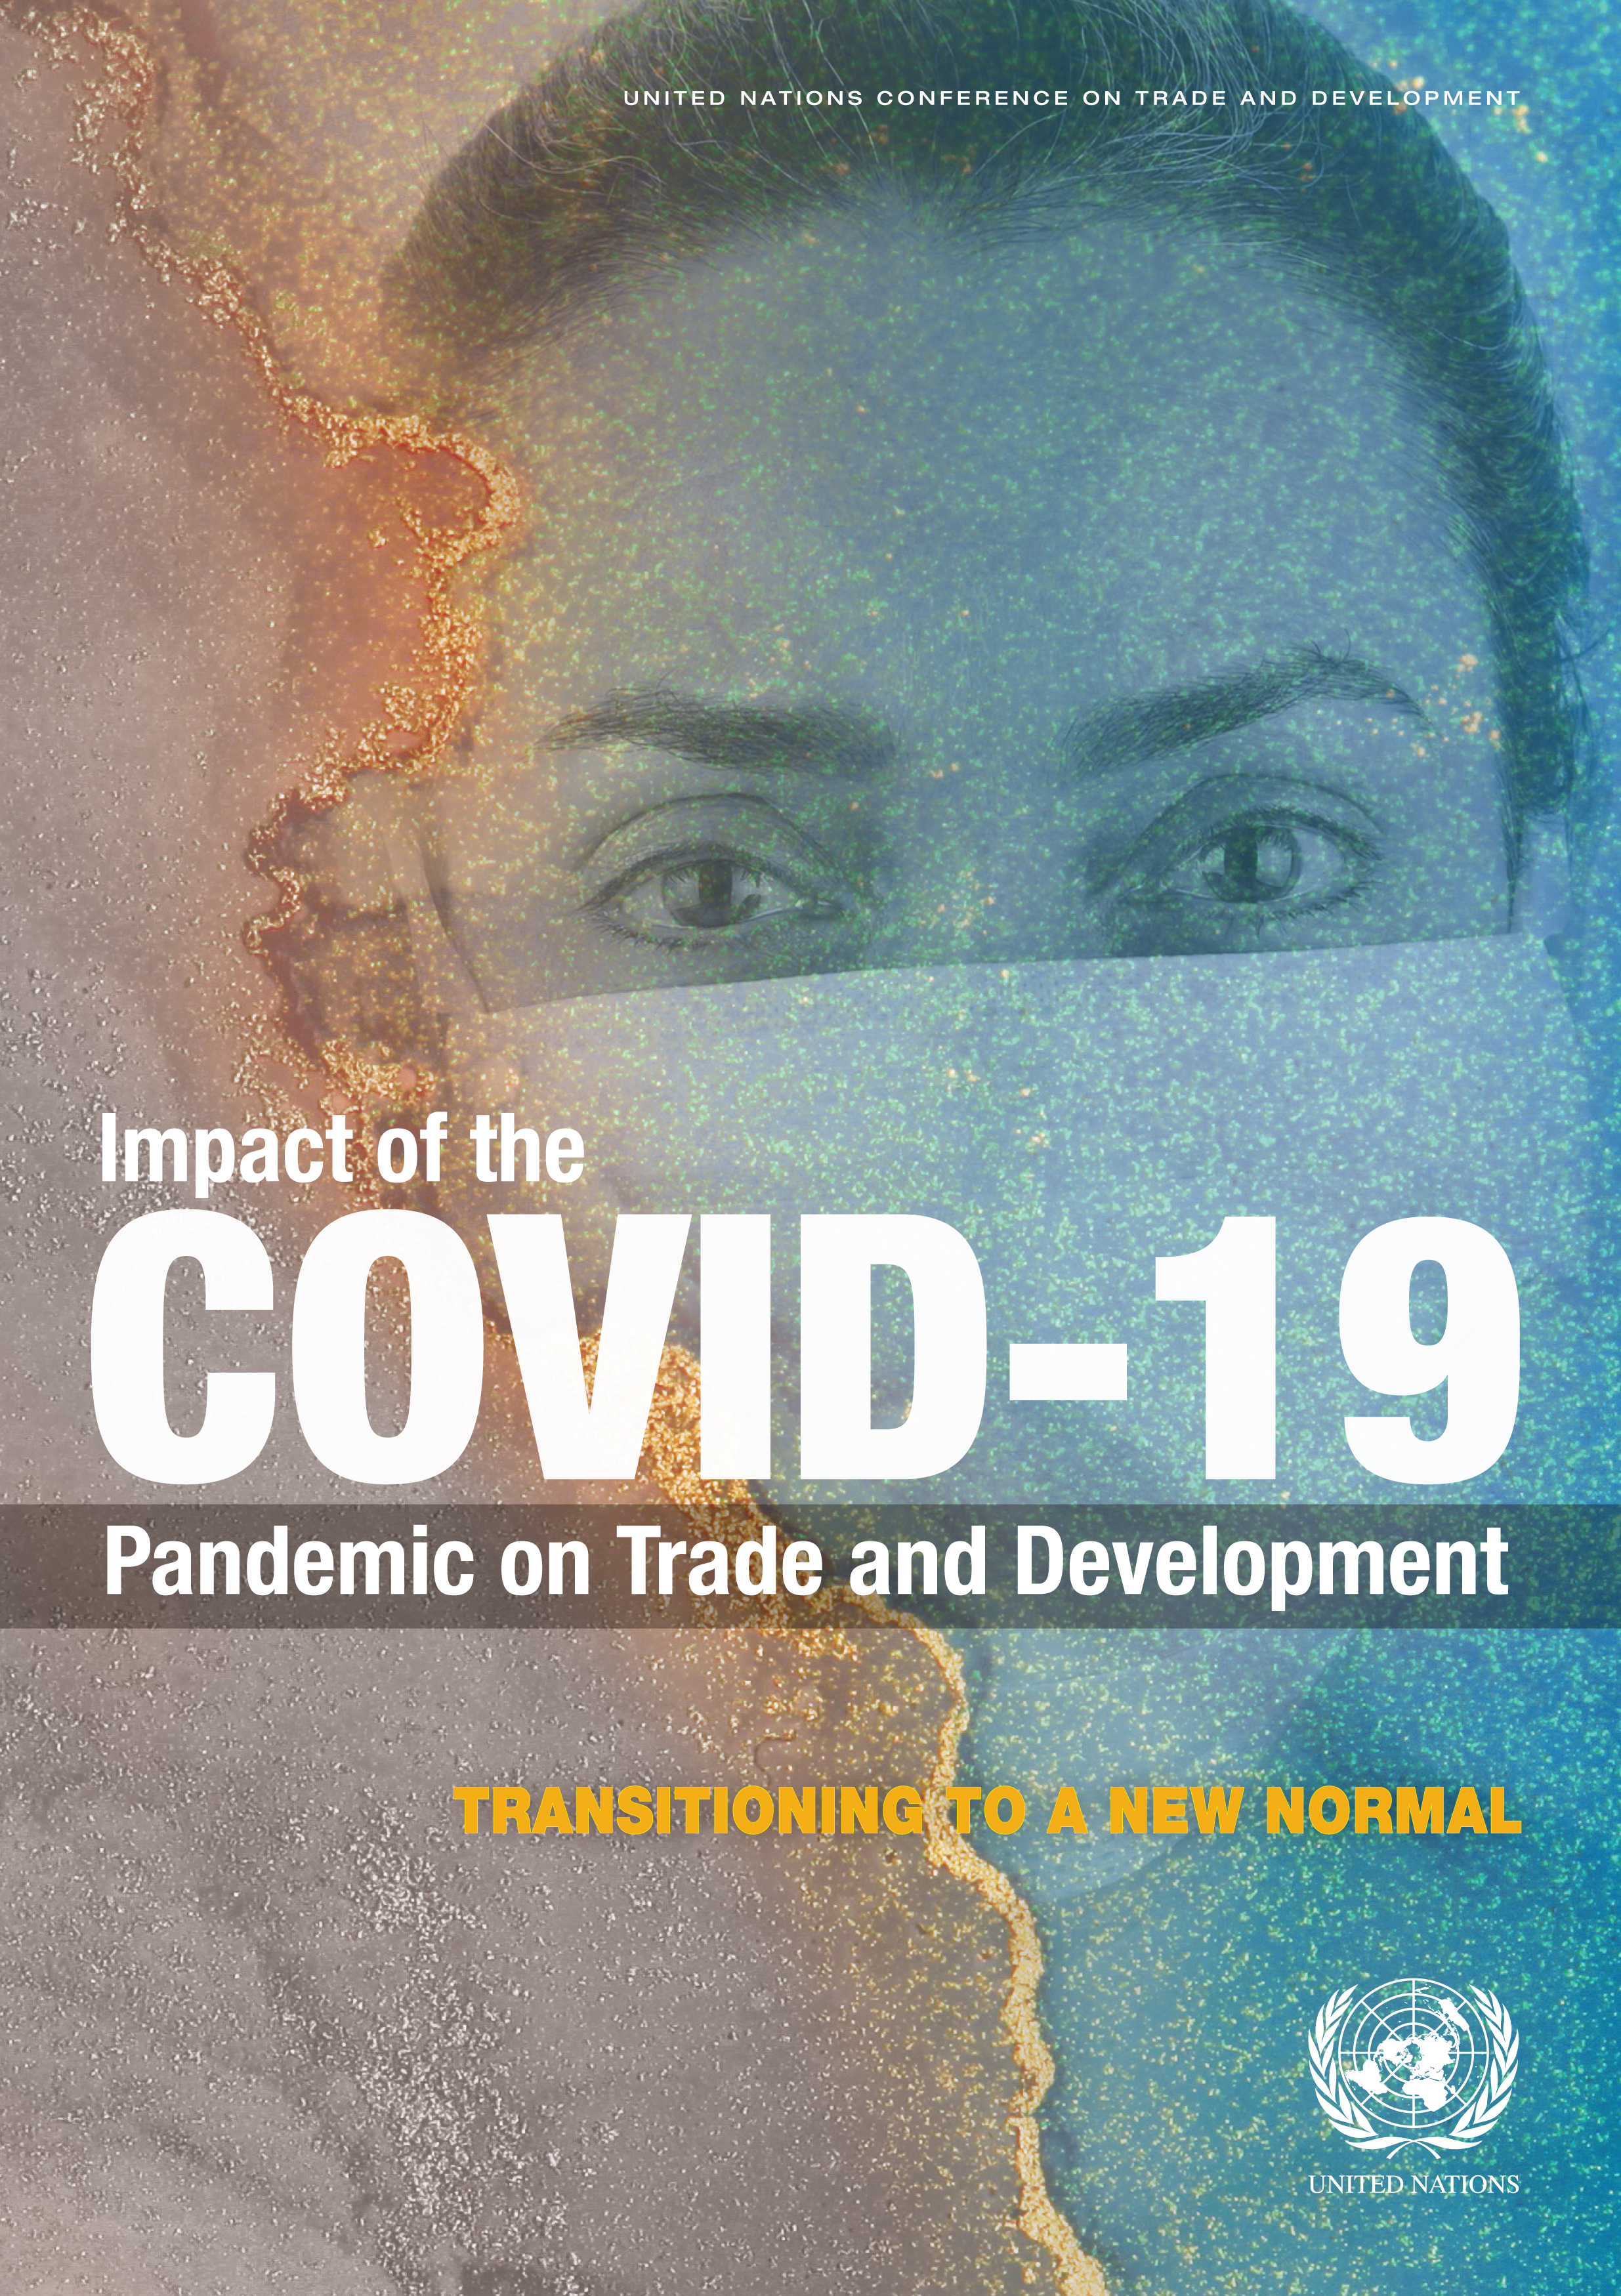 image of COVID-19 has shaken the trade and development landscape